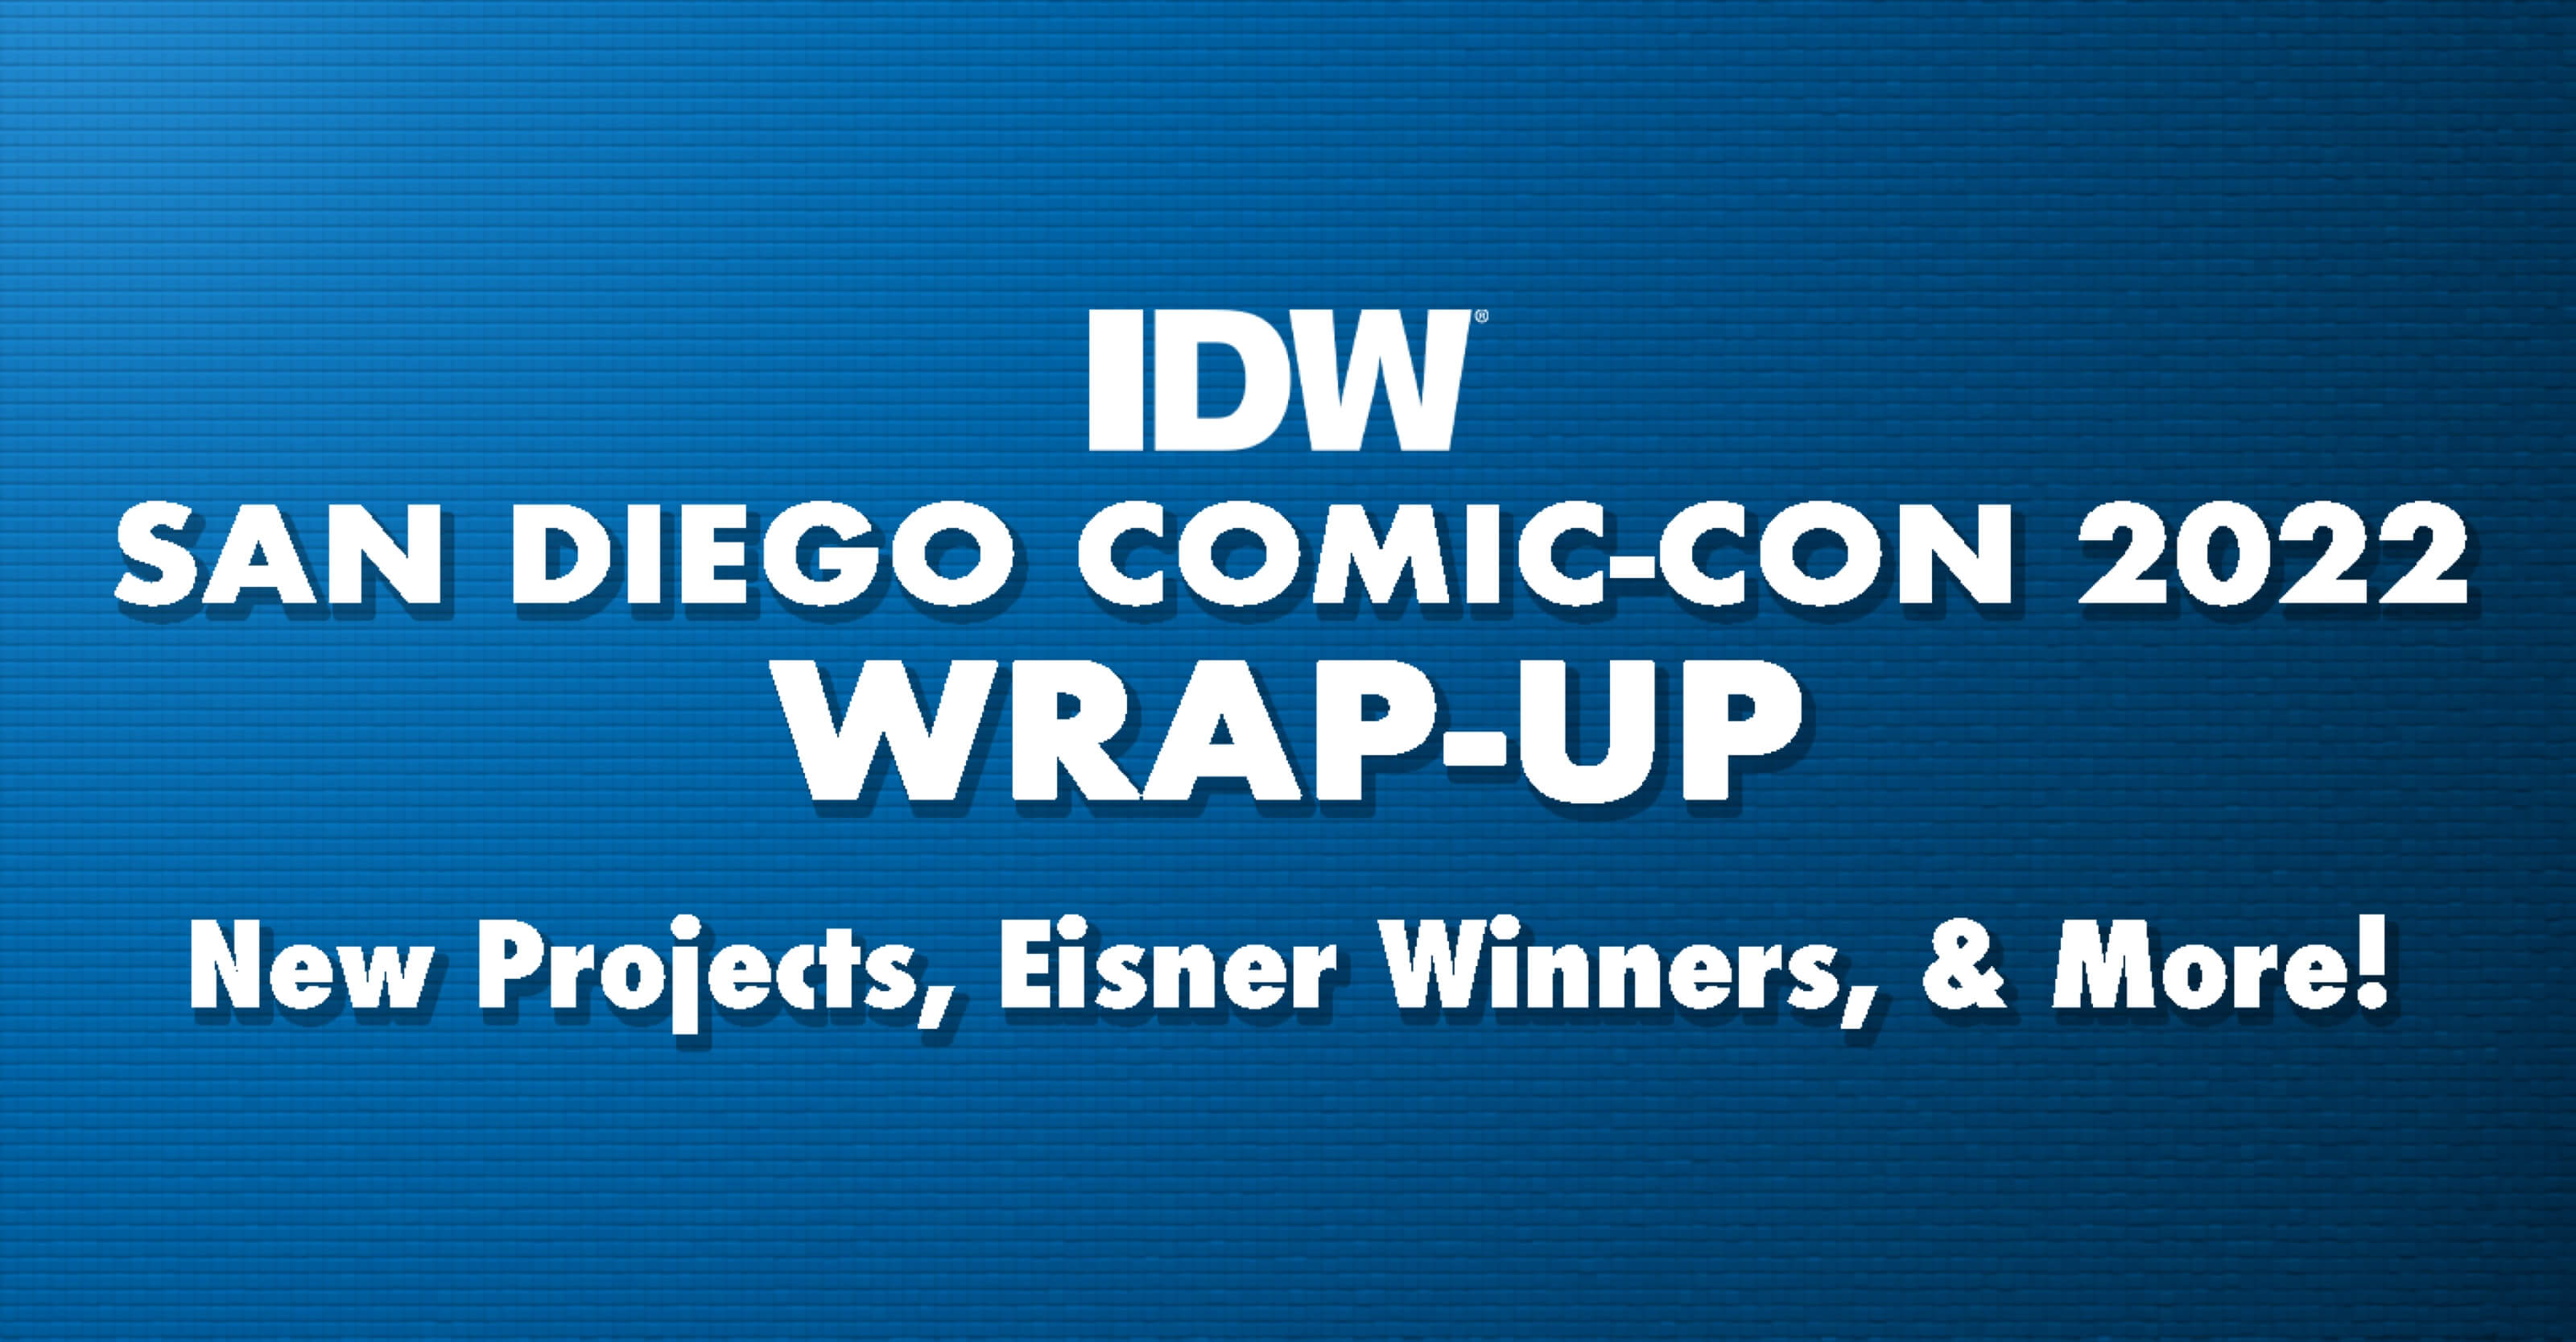 The Highlights of IDW's Announcements and Panel Reveals from San Diego Comic-Con 2022